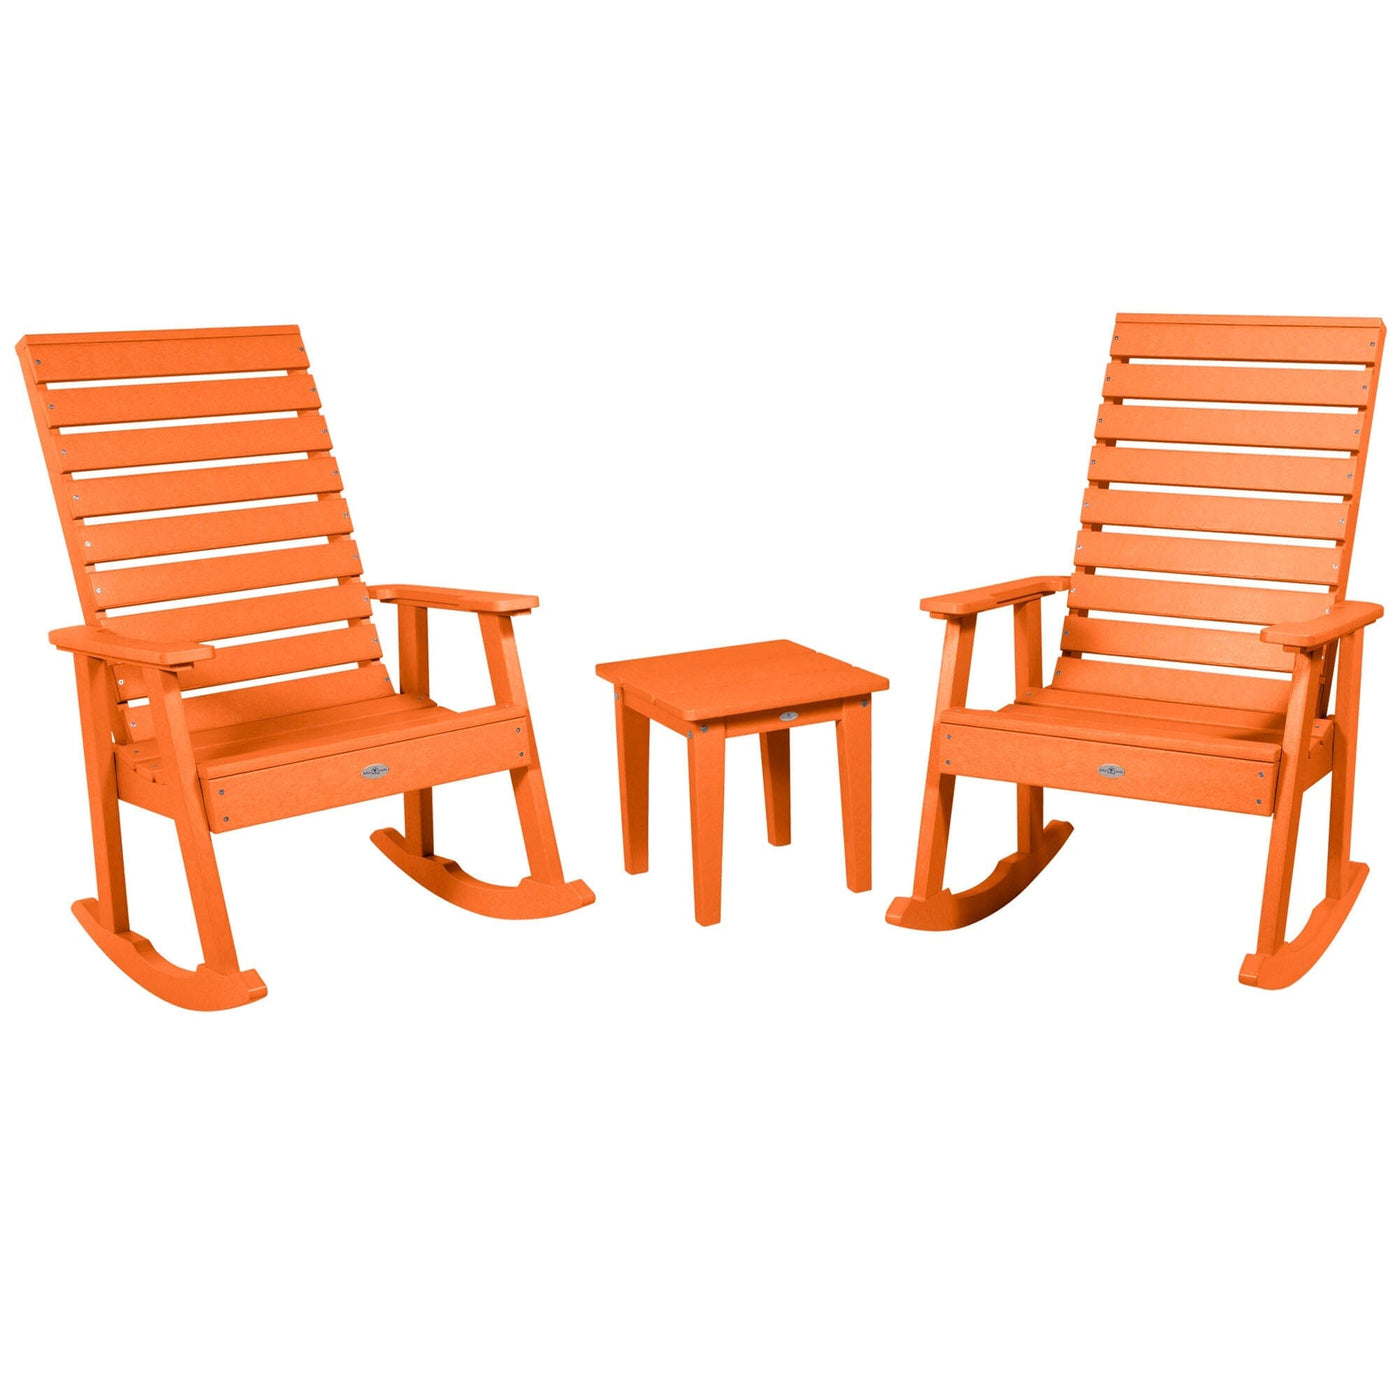 Riverside Rocking Chair and Side Table 3pc Set Kitted Set Bahia Verde Outdoors Citrus Orange 